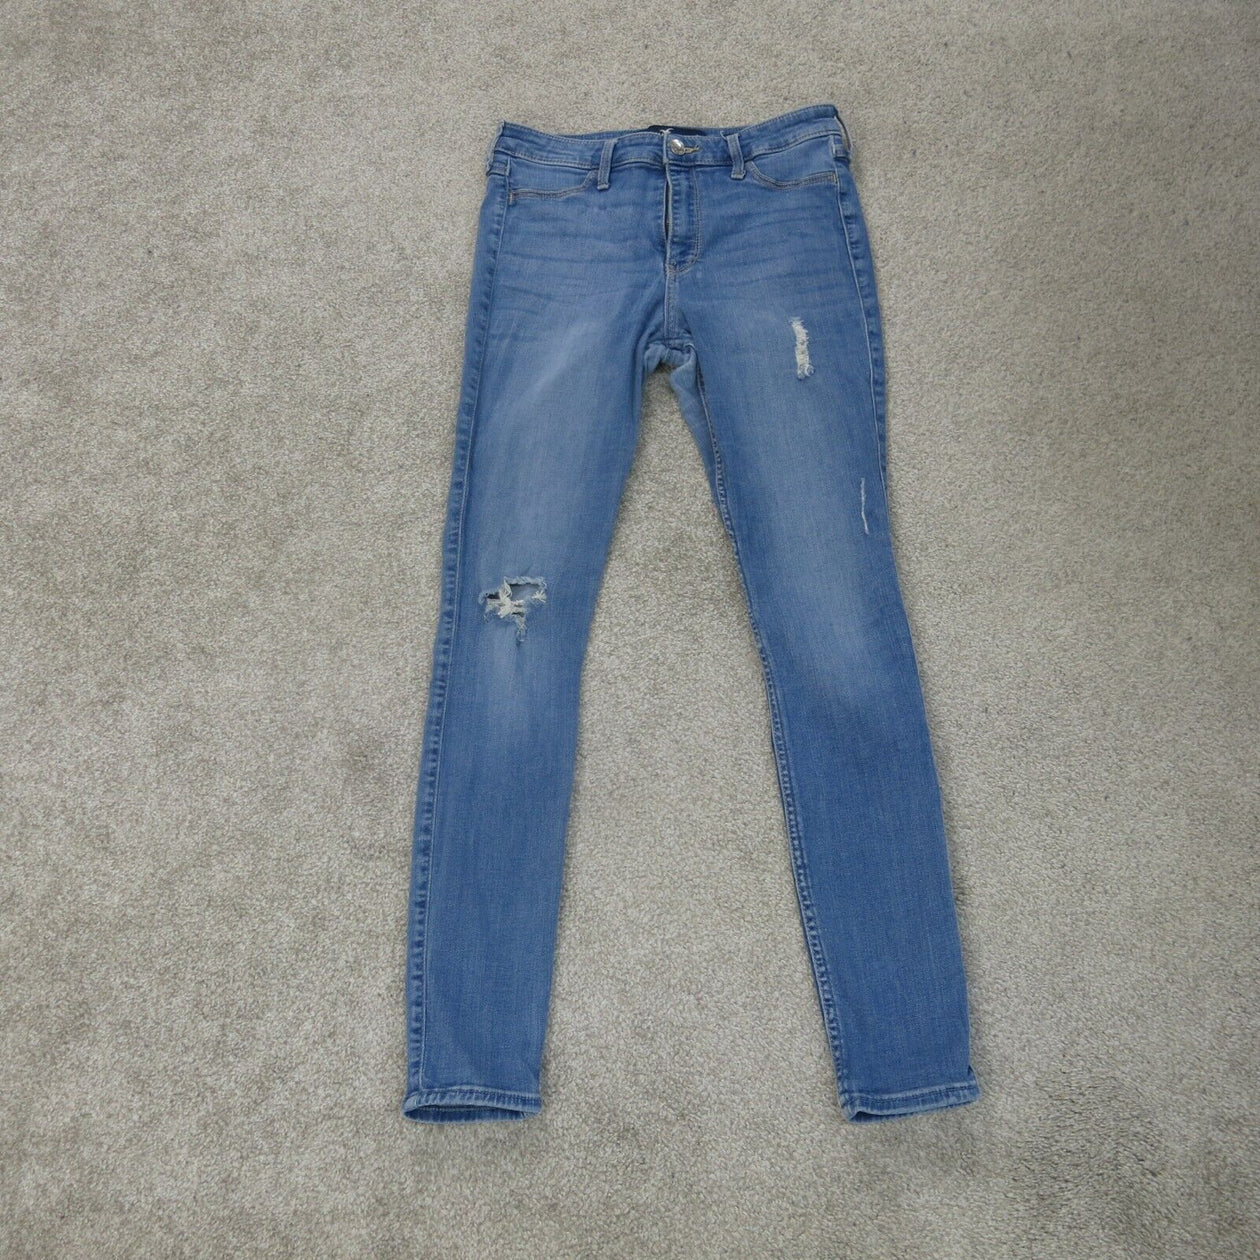 Hollister Low Rise Bootcut Jeans Women's Size 28 Classic Stretch